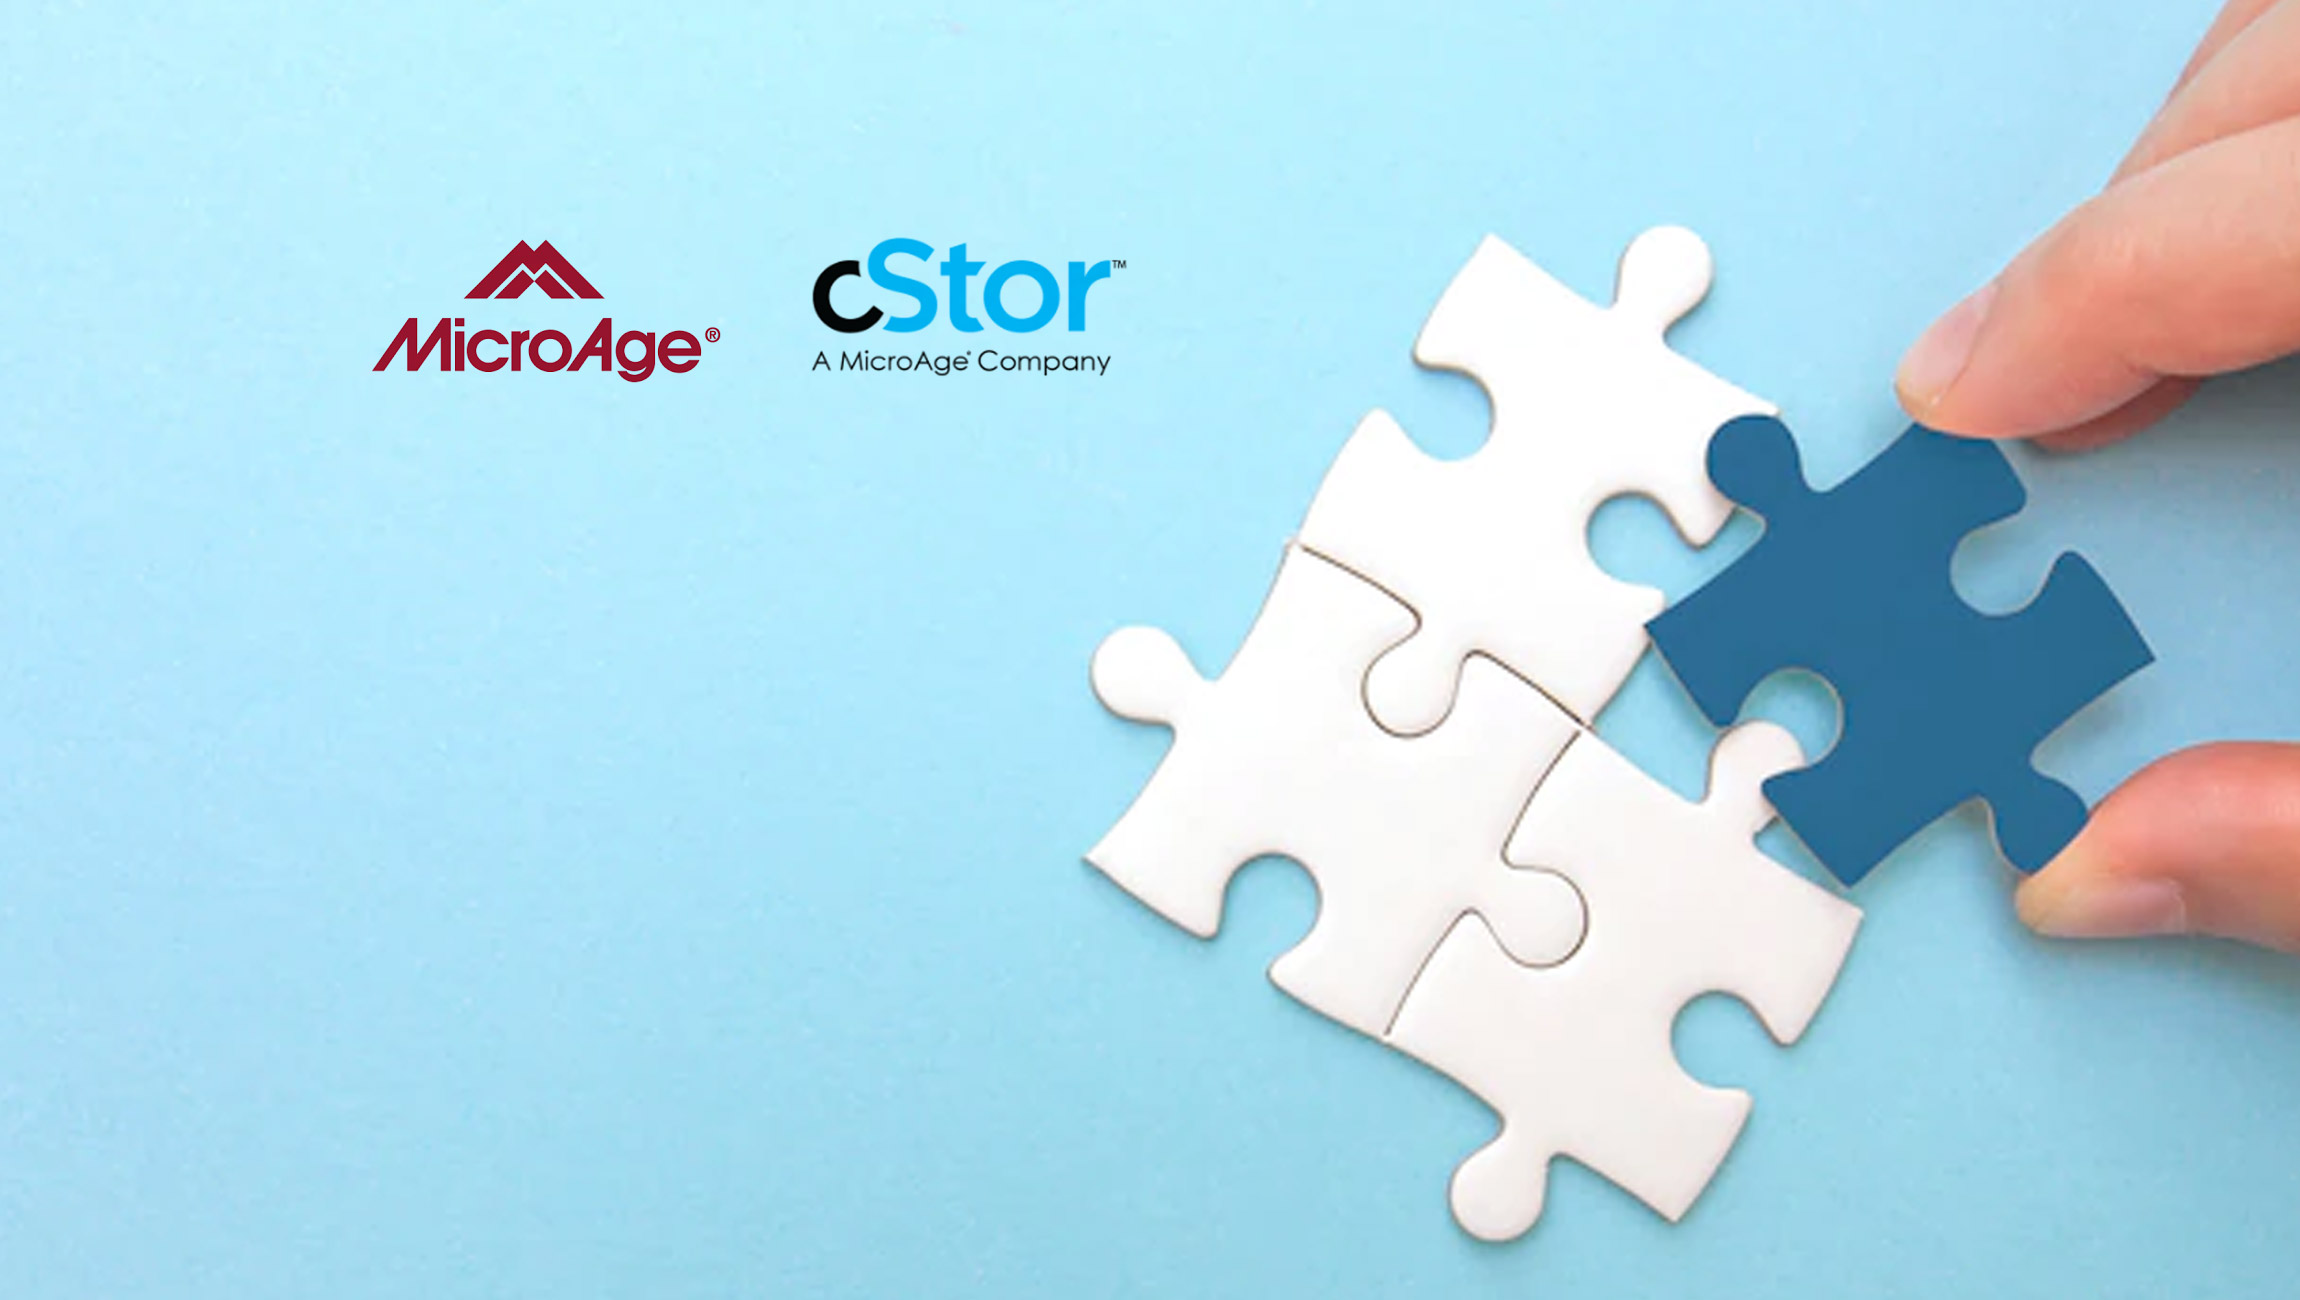 MicroAge-Expands-its-Cybersecurity-and-Infrastructure-Expertise-with-the-Acquisition-of-cStor